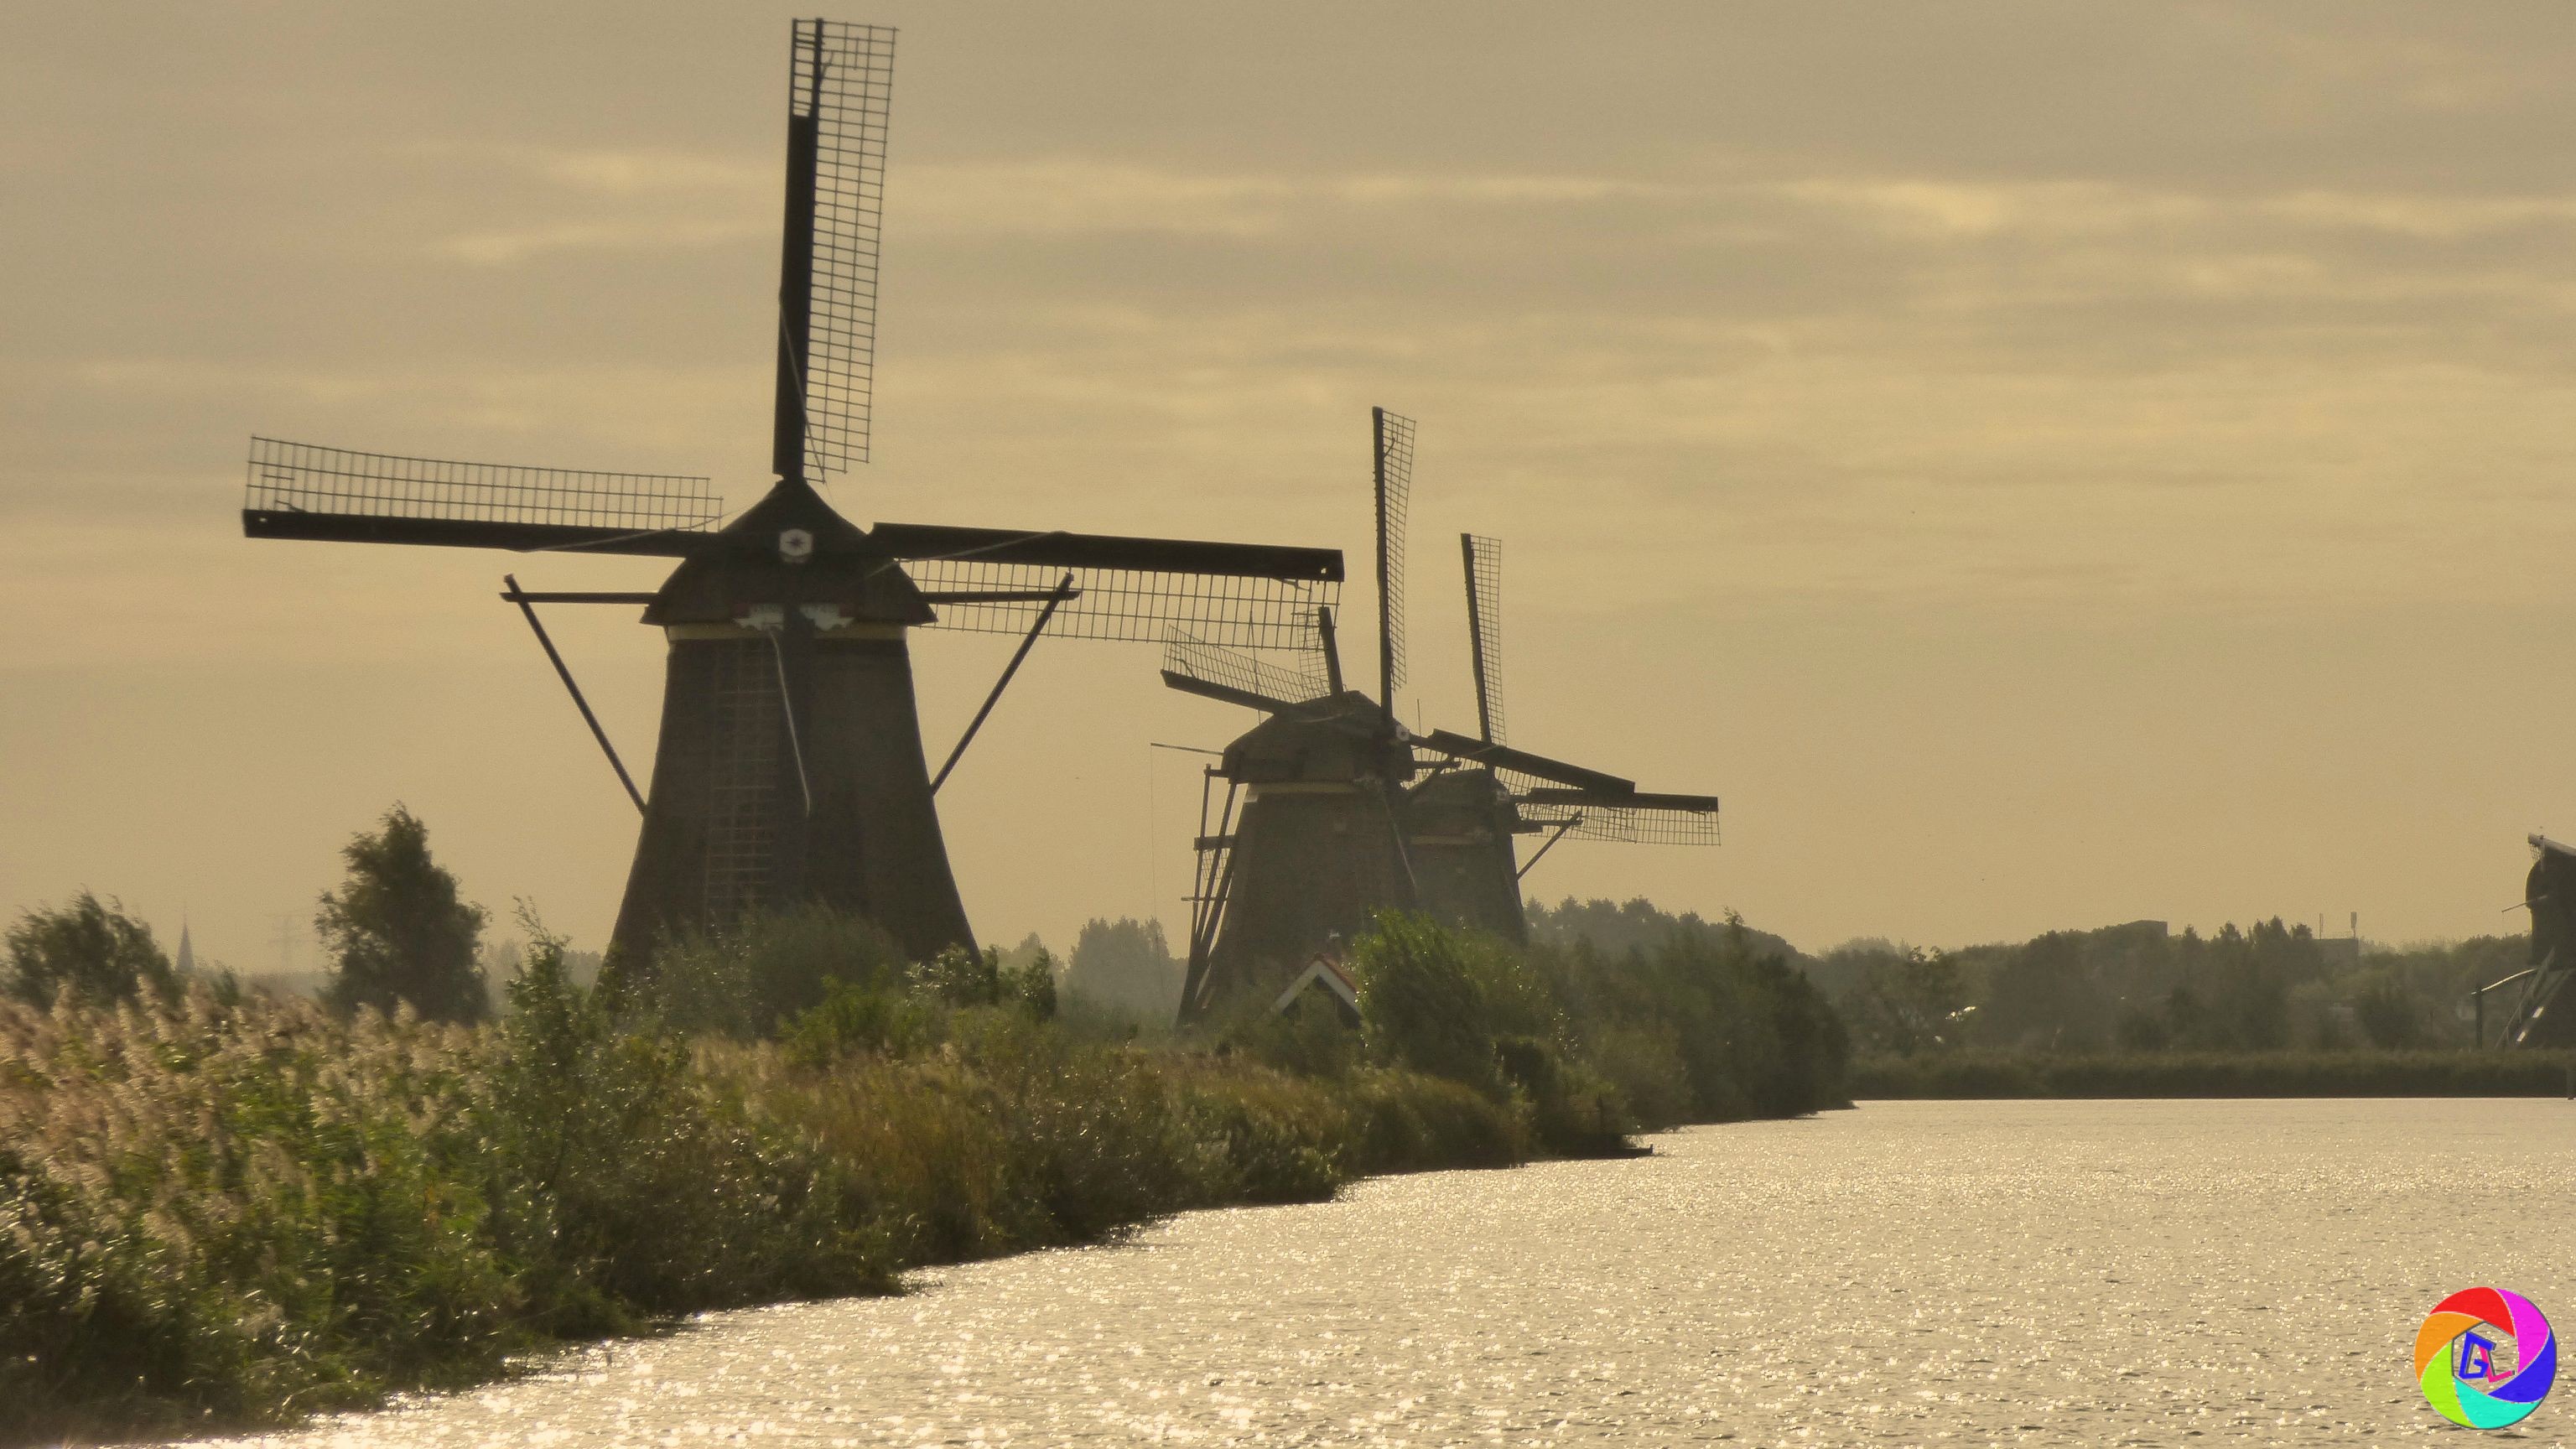 "Windmills" (Water pumps) from the 18th Century enabling the Dutch to reclaim land from swamps.